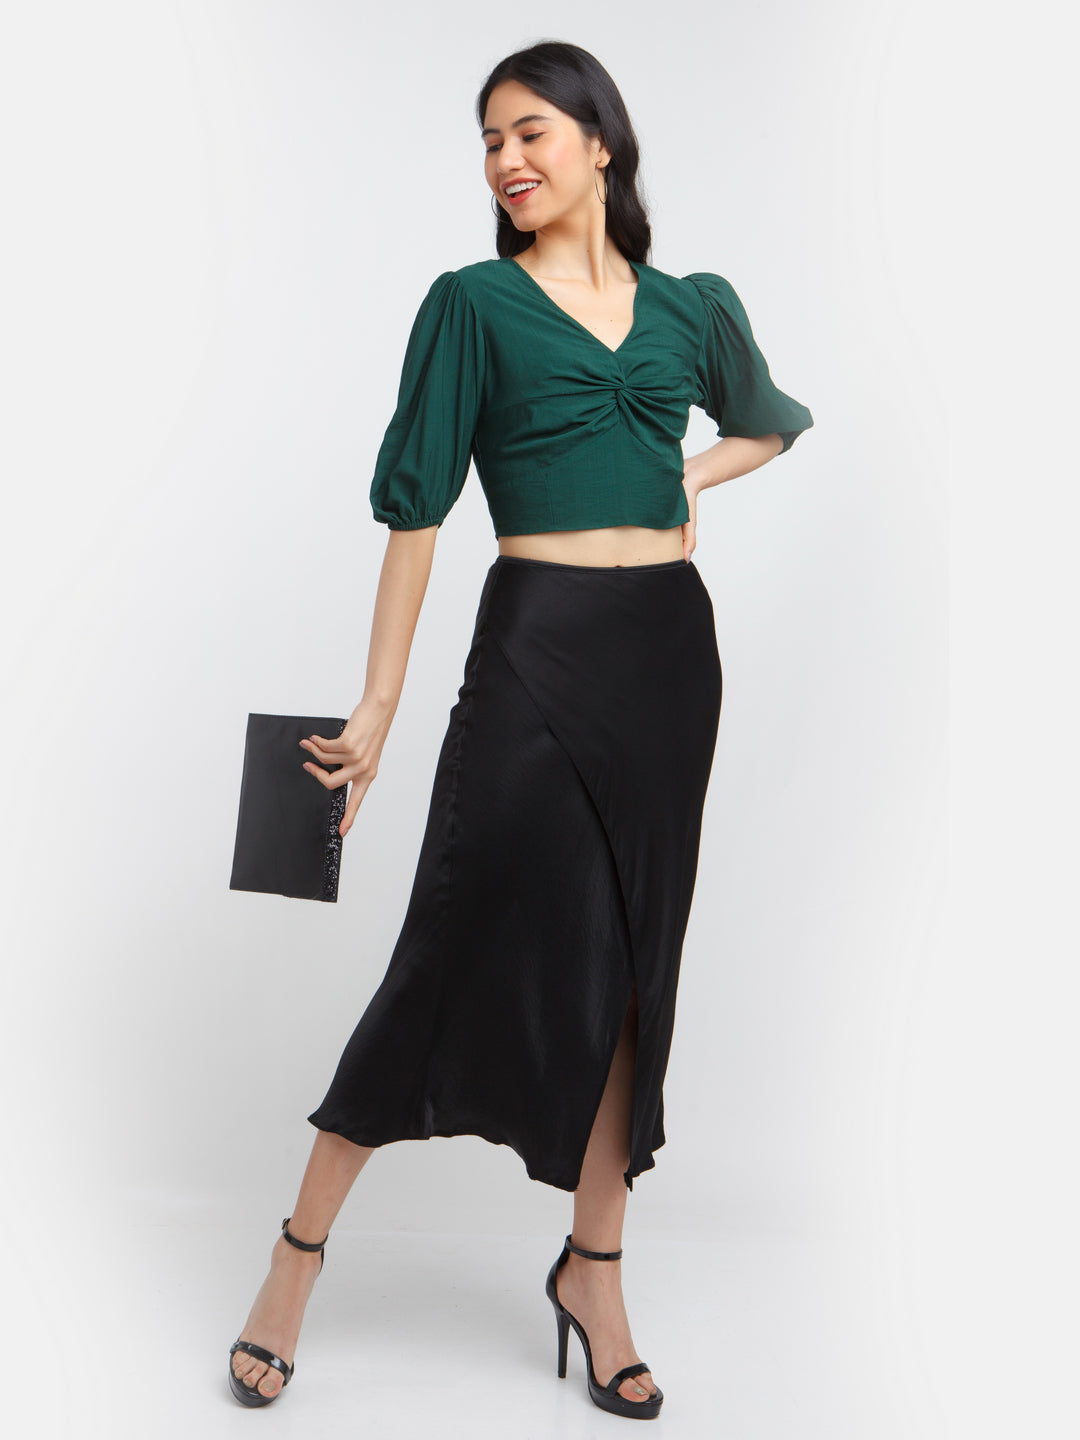 Green Solid Twisted Top For Women